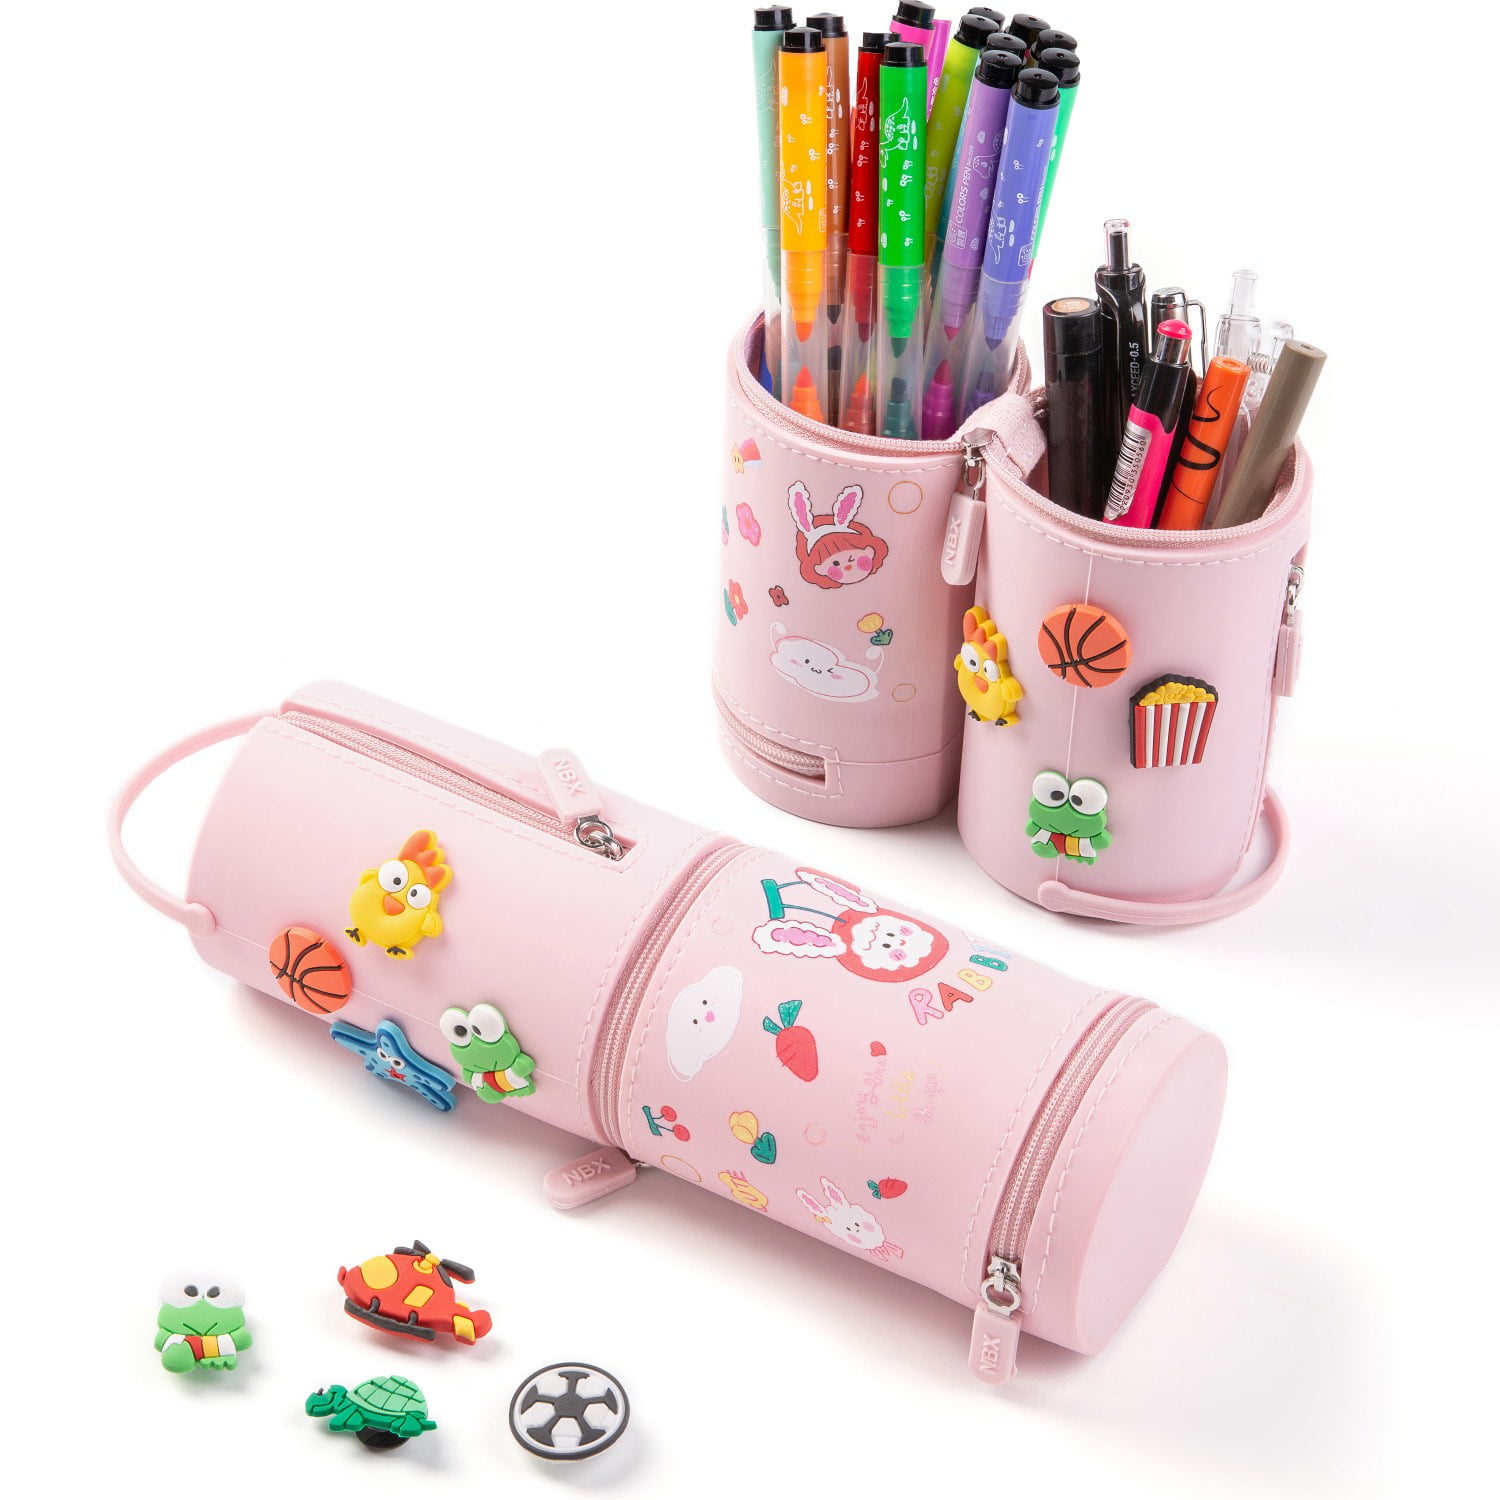 Unicorn Pencil Case for Girls, Cute Pouch Box Bag for Little Kids Toddlers  with Zipper, Large Capacity Crayon Pen Holder, Soft Pouches Bags for Small